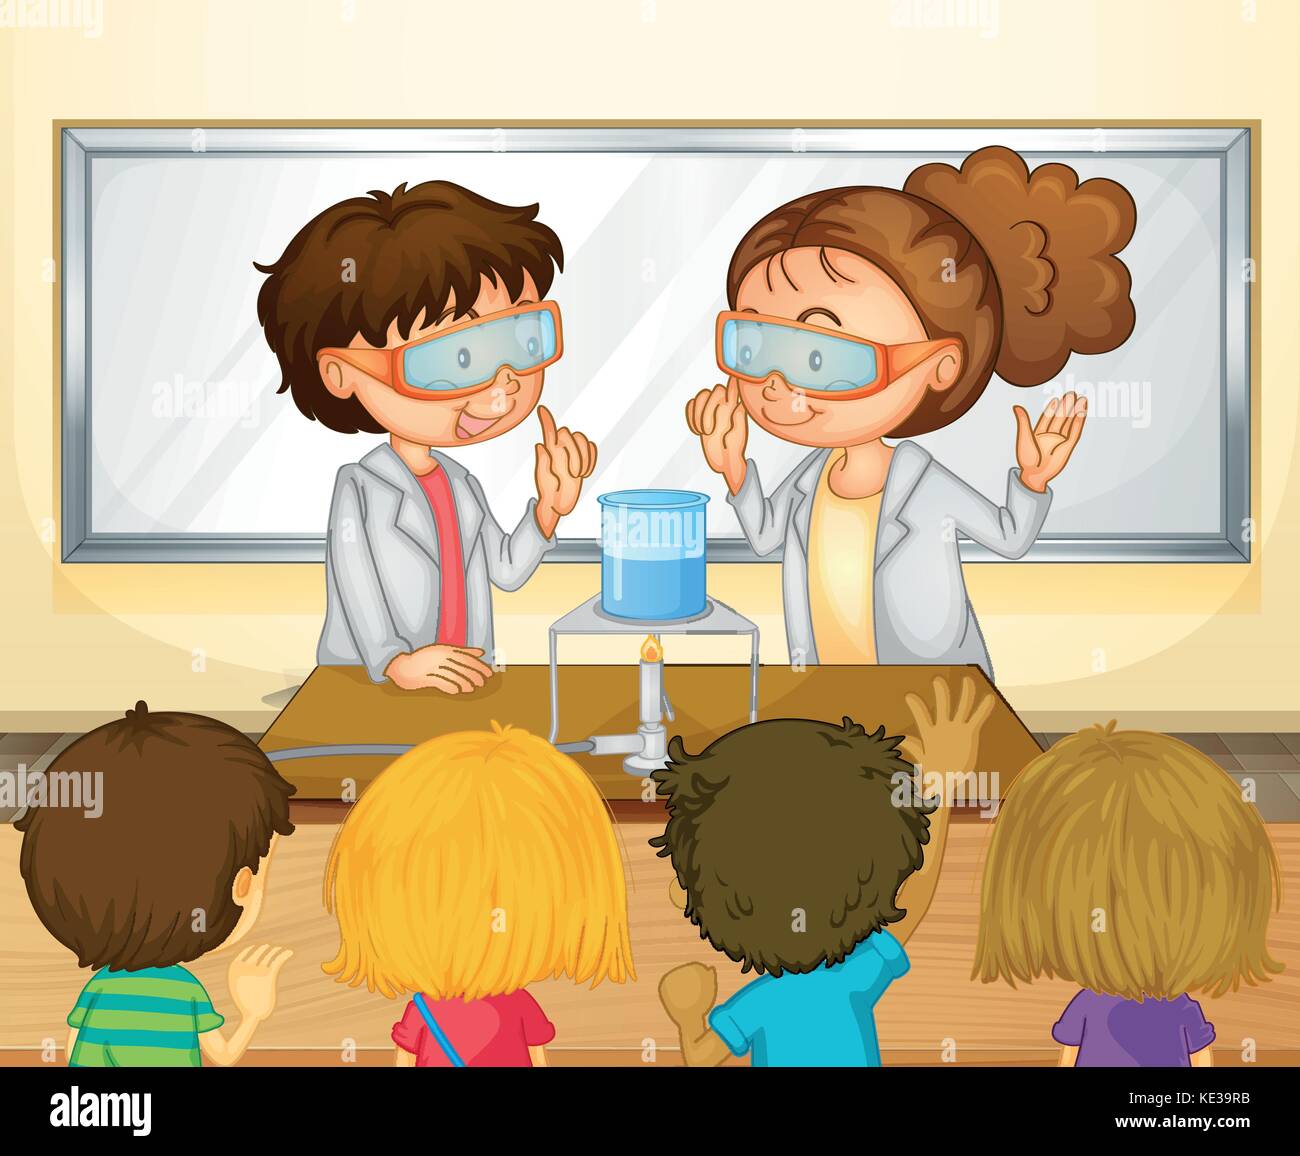 Students doing science experiment in classroom illustration Stock Vector